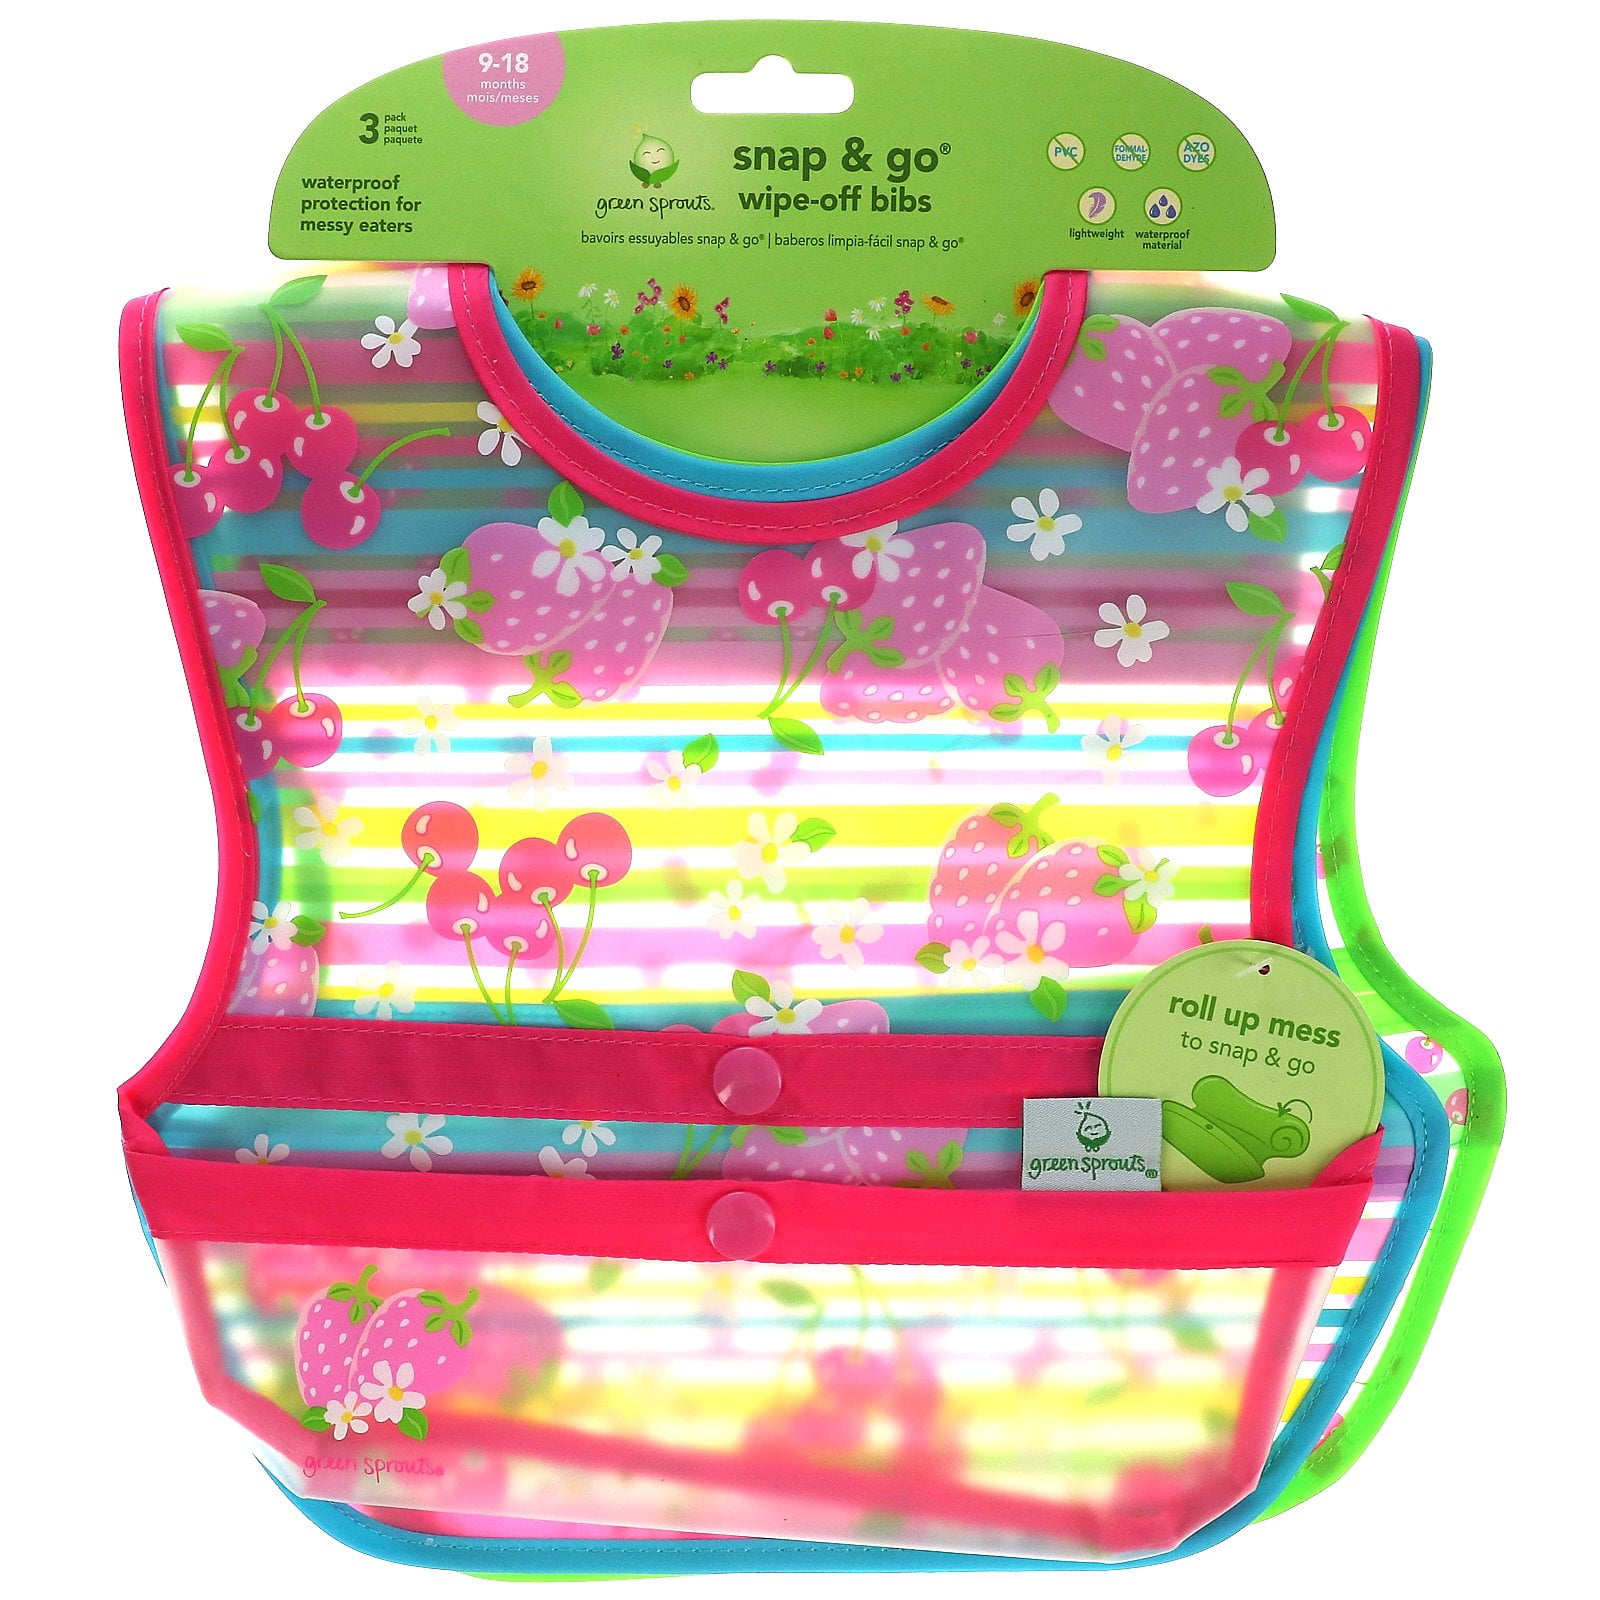 waterproof protection for messy eaters Interchangeable tops to keep baby dry 4pc set Neatly roll up for mess & utensil storage green sprouts Snap & Go Silicone Food-catcher Bib | 3 meal 